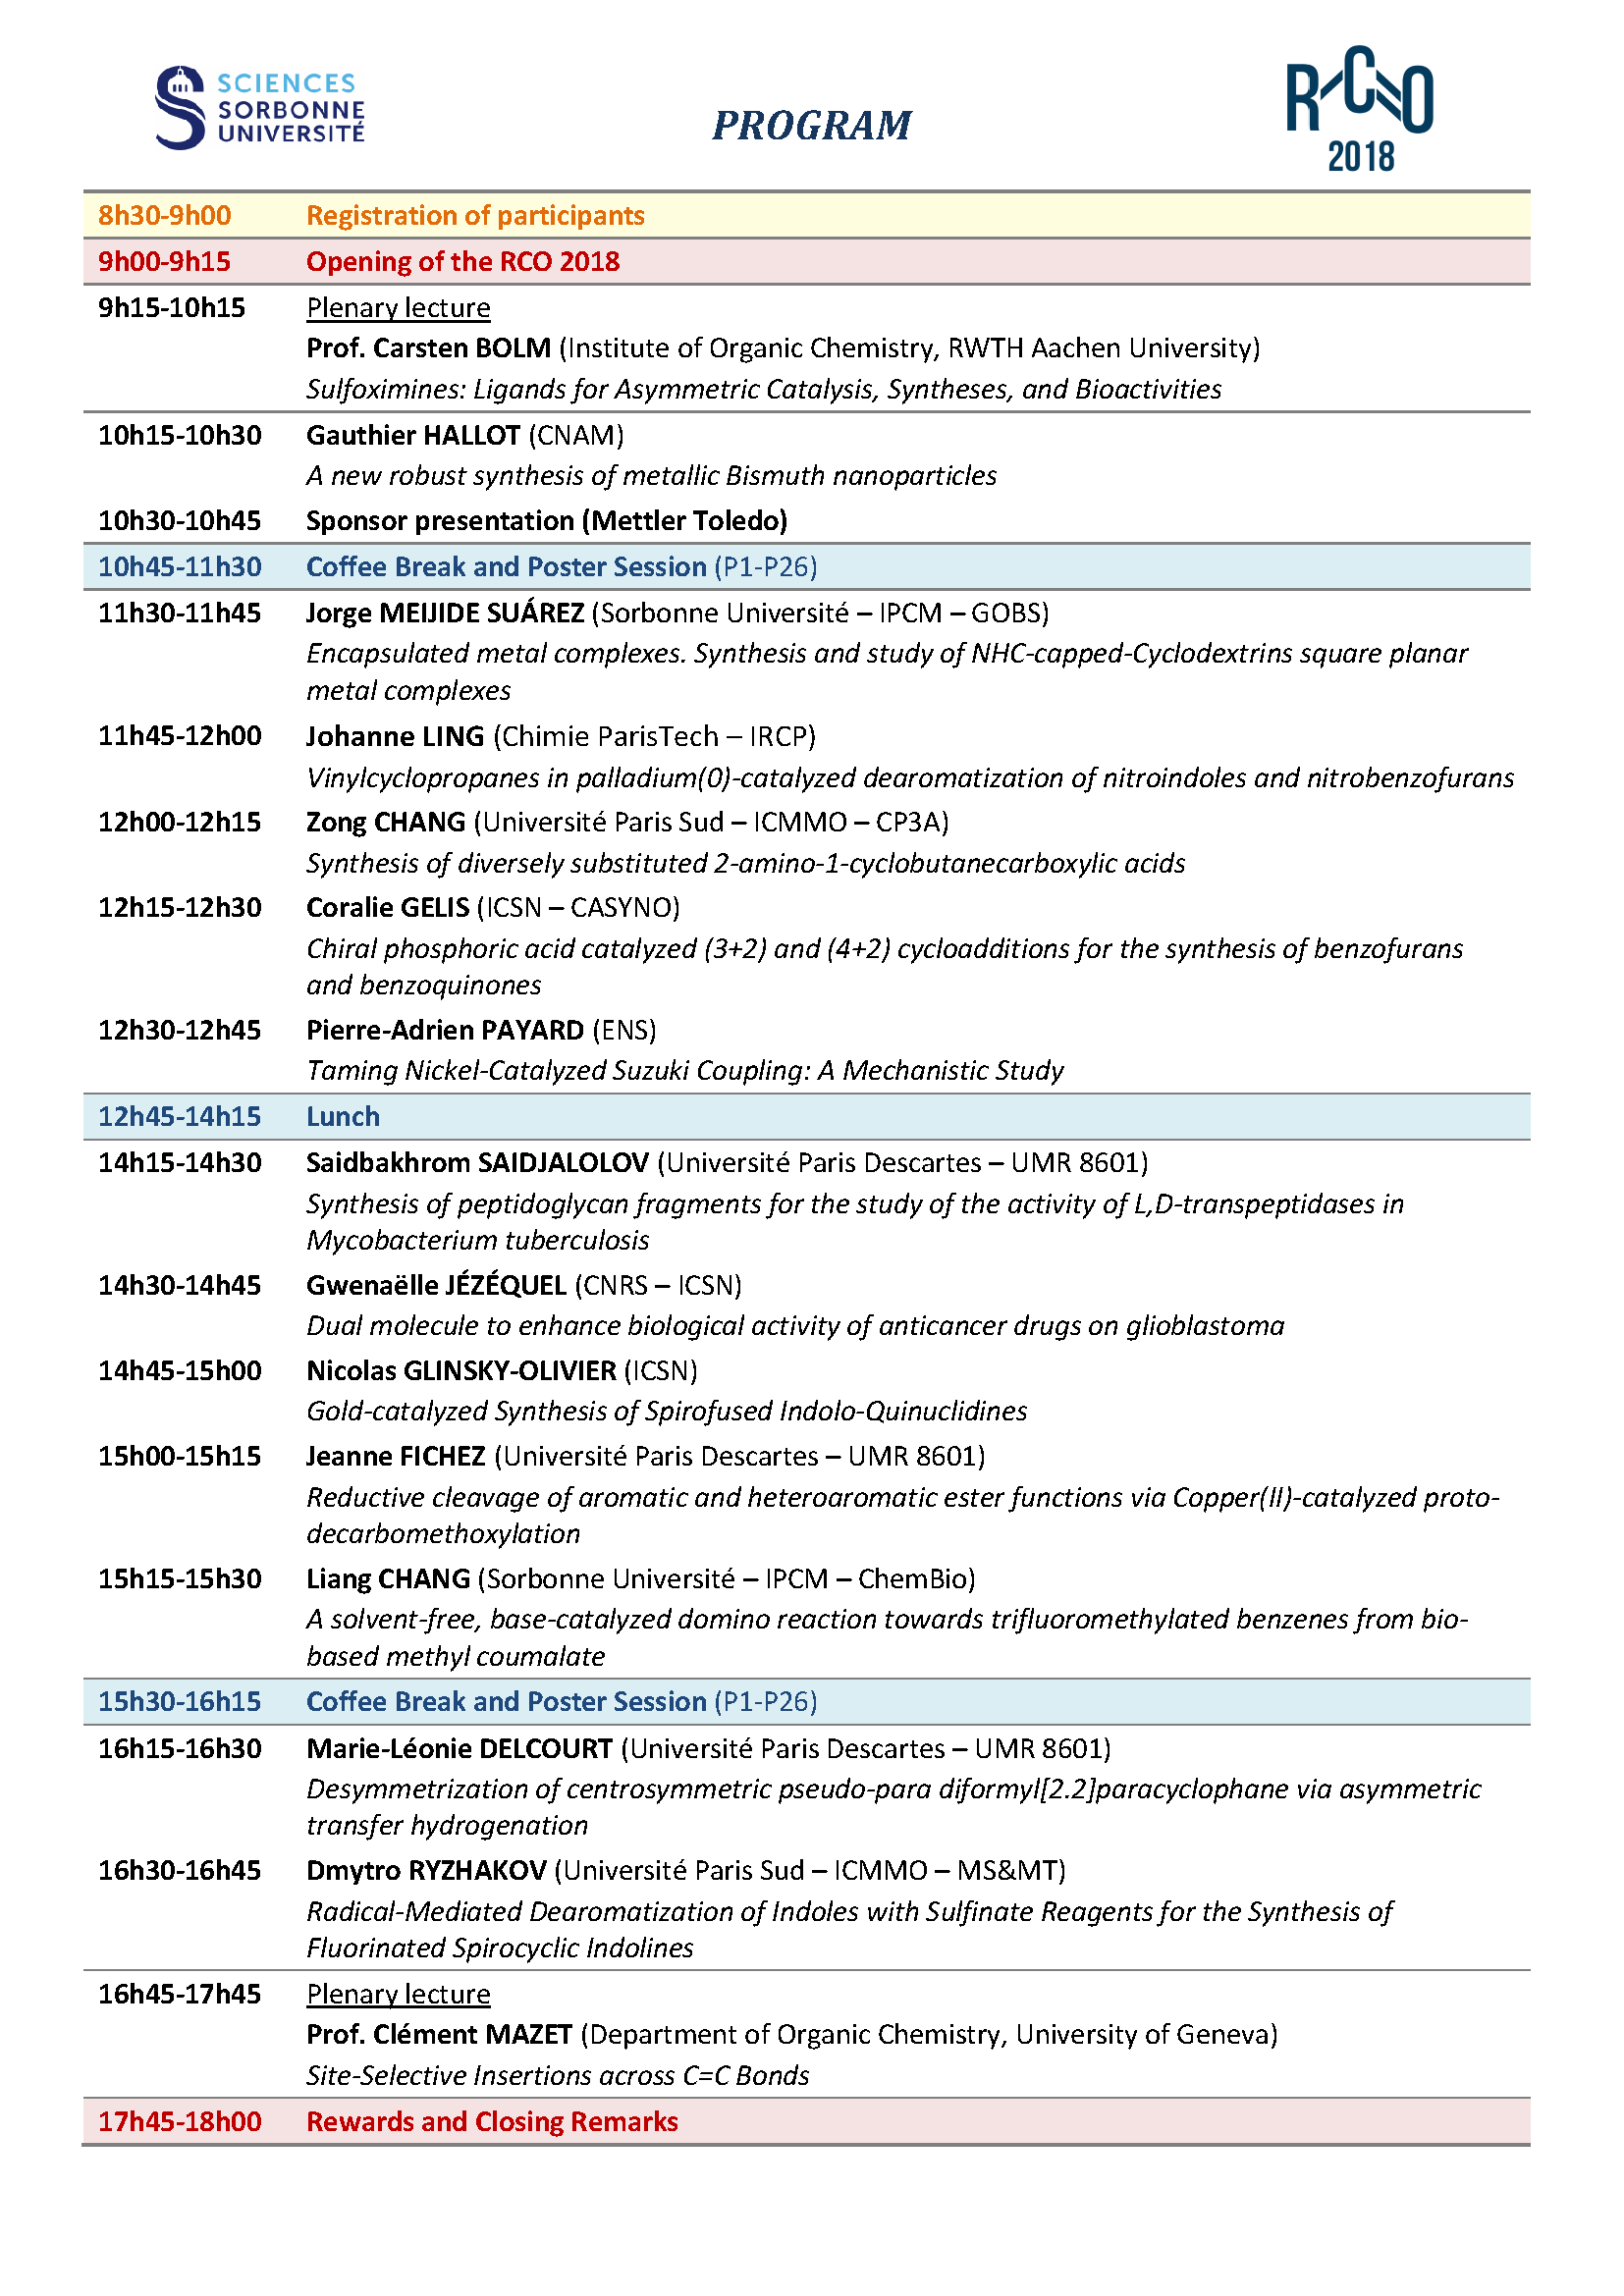 Programme_RCO_2018.png